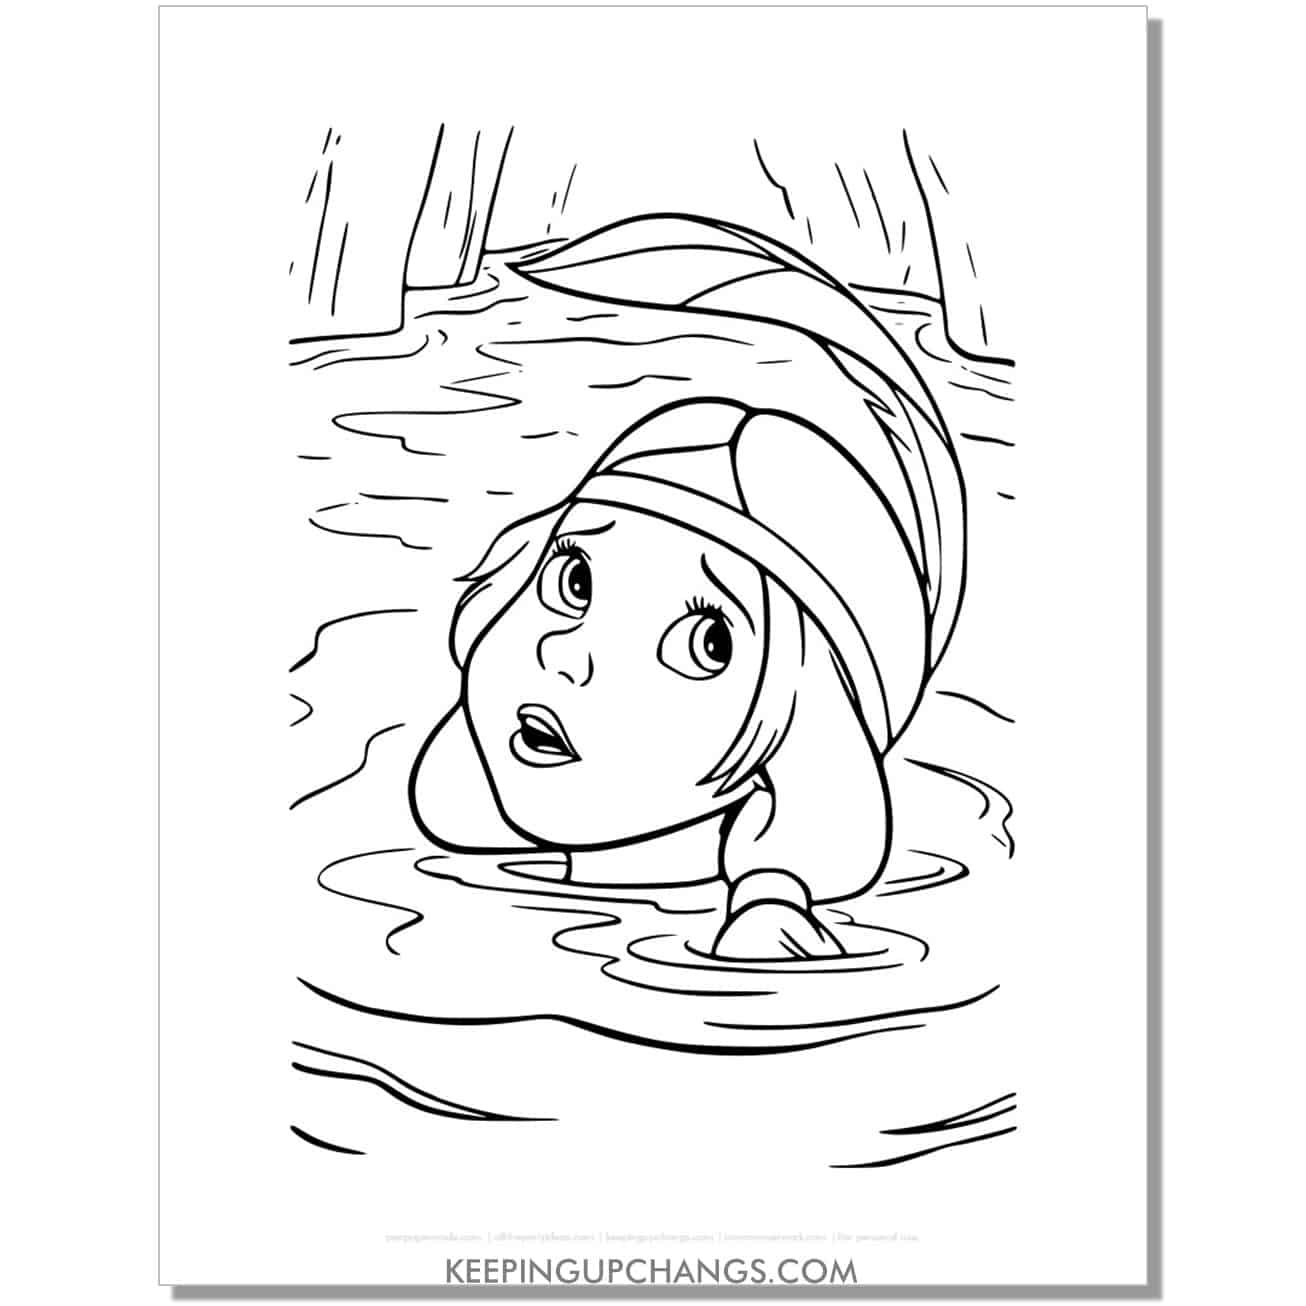 tiger lily floating in water coloring page, sheet.